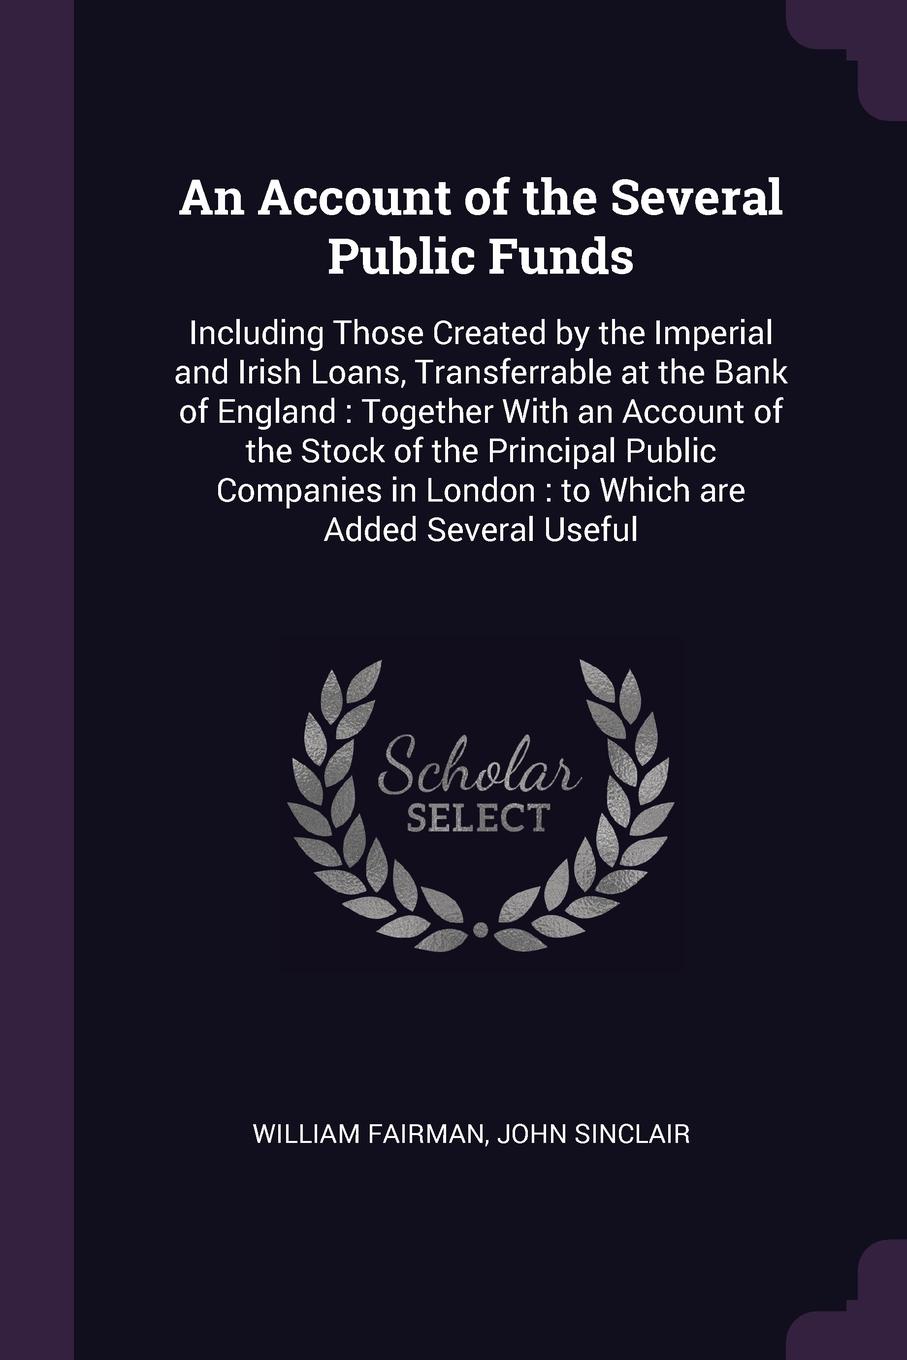 An Account of the Several Public Funds. Including Those Created by the Imperial and Irish Loans, Transferrable at the Bank of England : Together With an Account of the Stock of the Principal Public Companies in London : to Which are Added Several ...